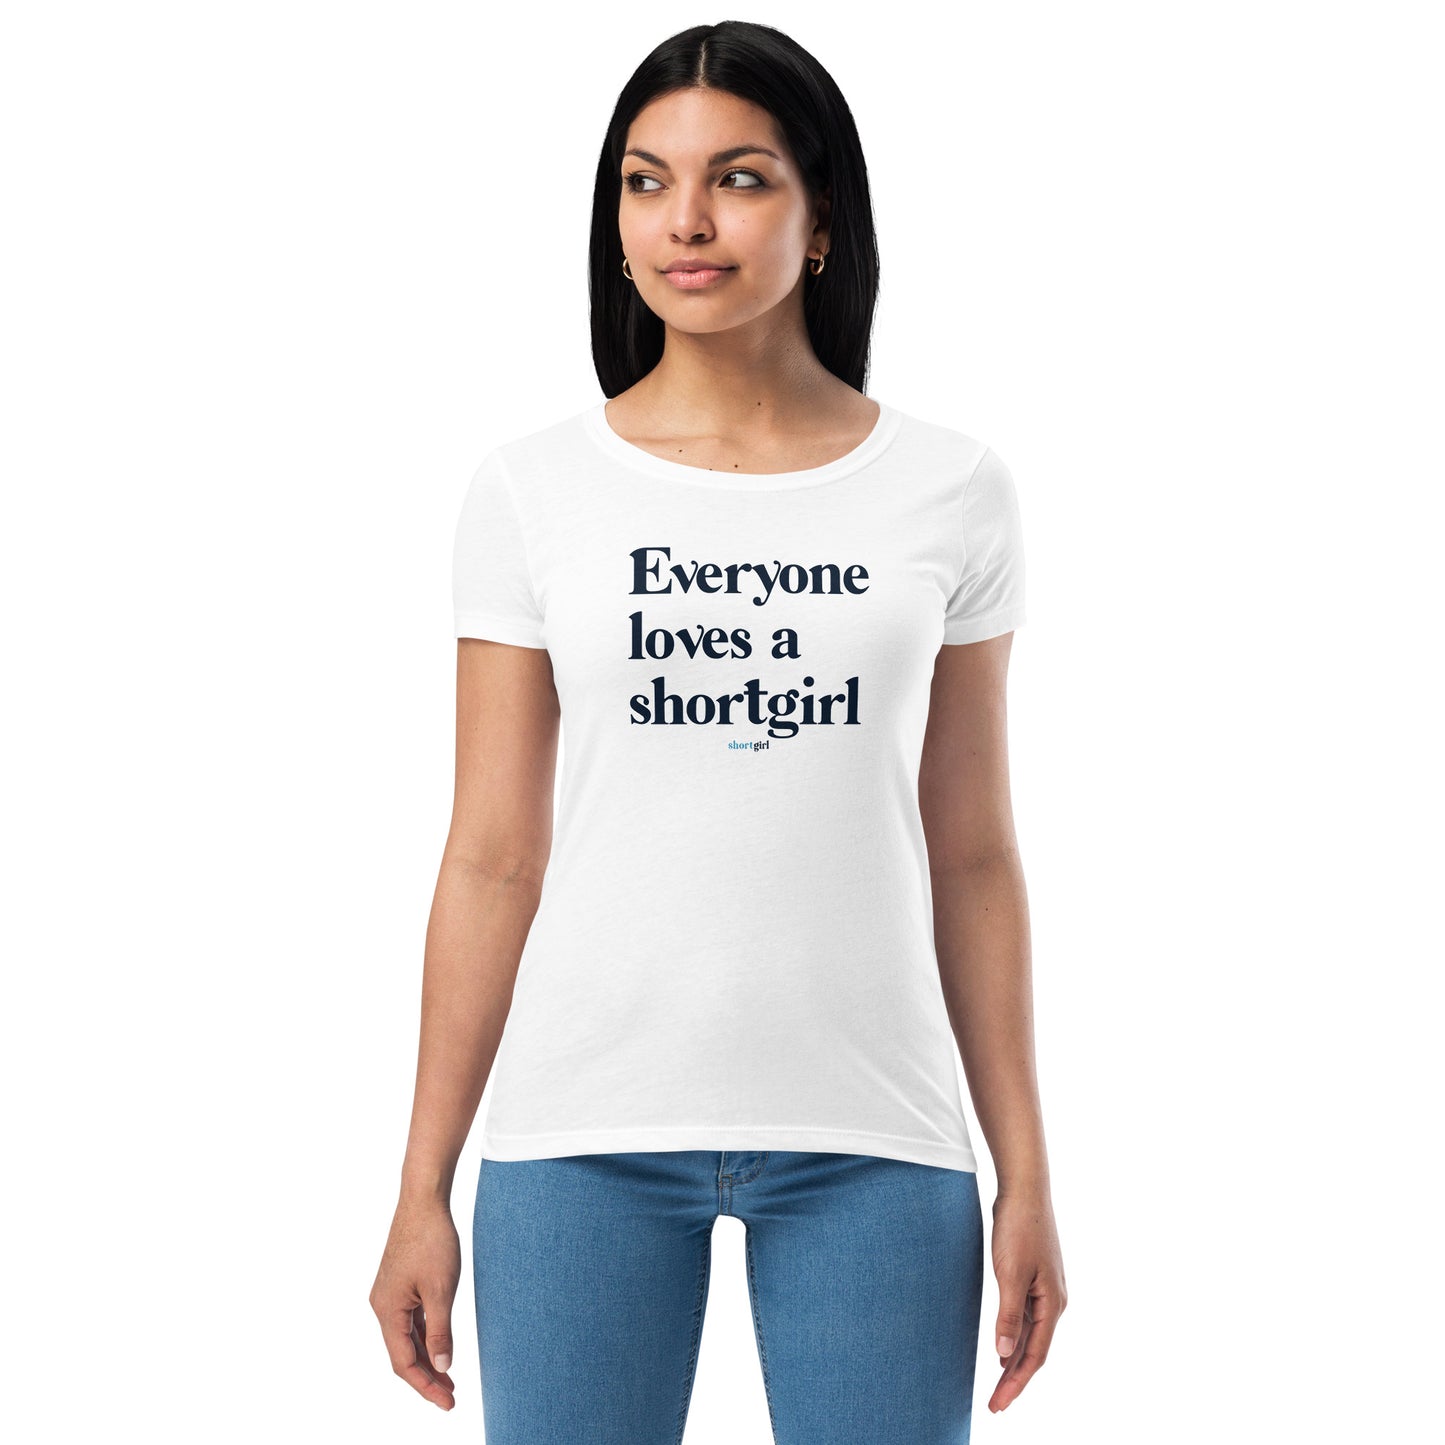 Women’s fitted t-shirt - Everyone loves a shortgirl